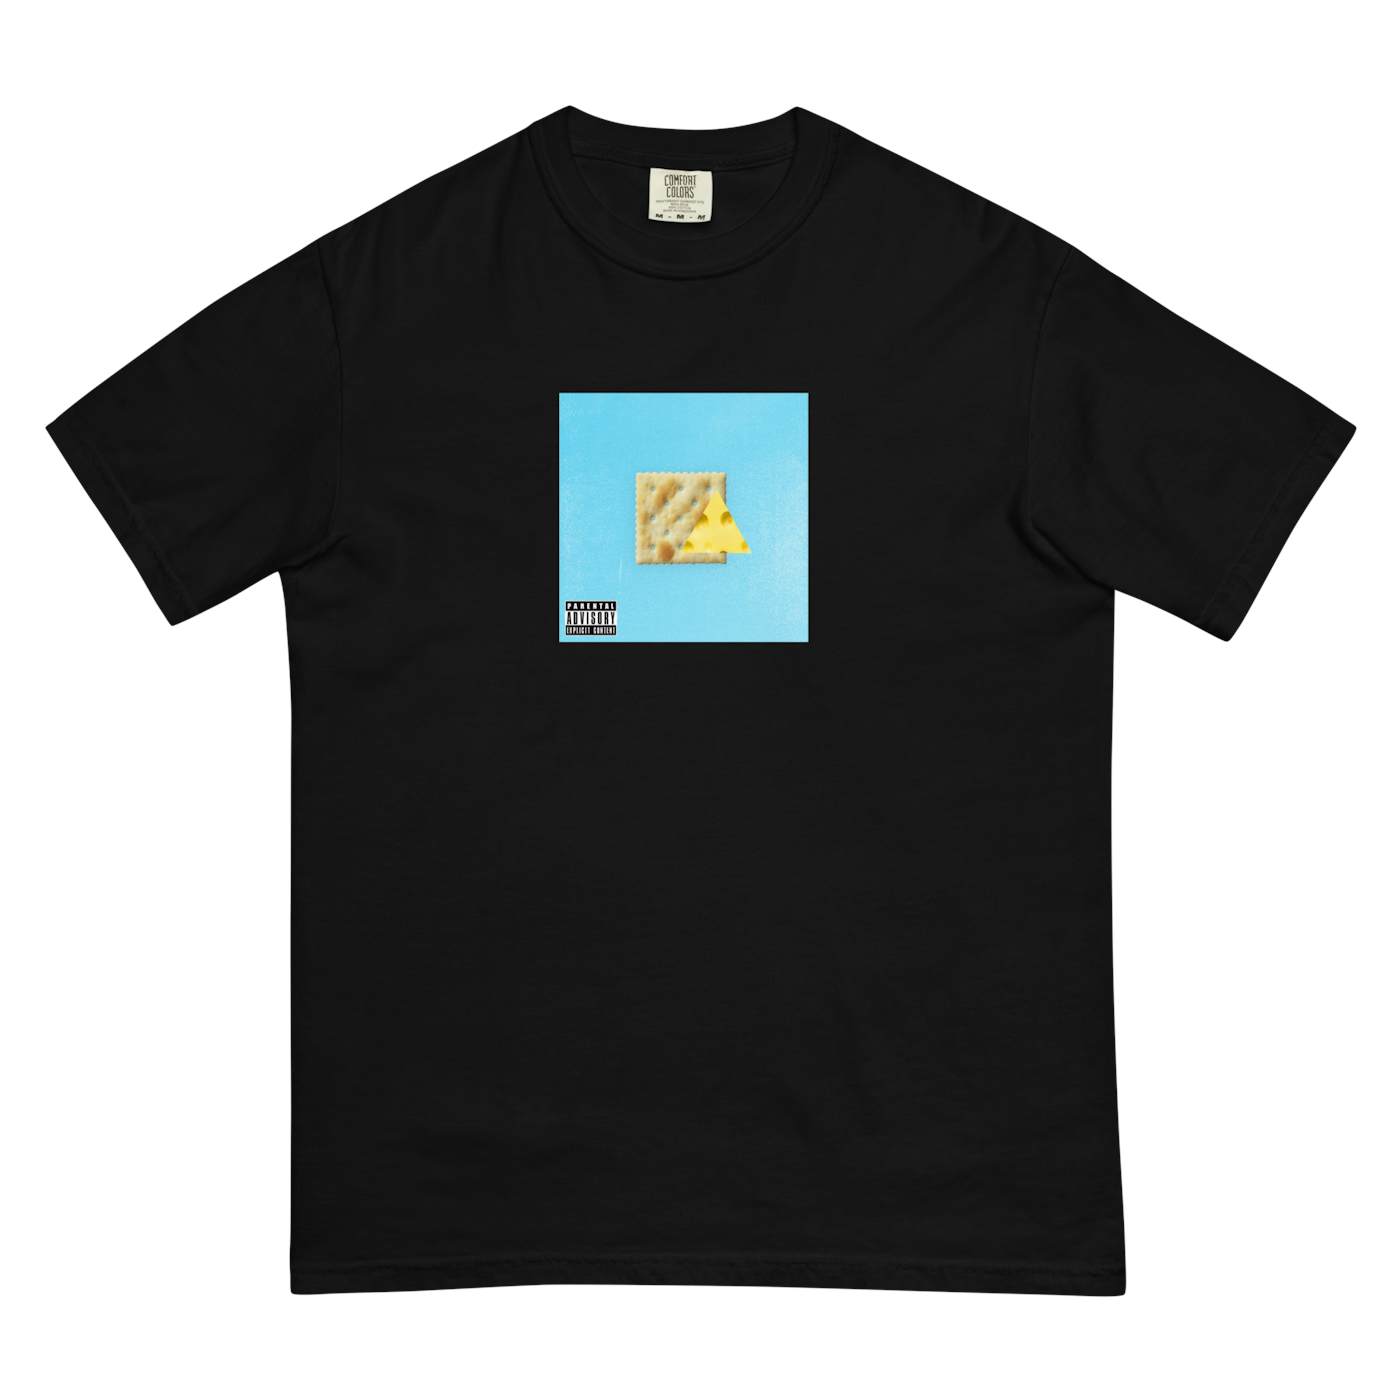 Coley Cracker With Cheese Album T-Shirt